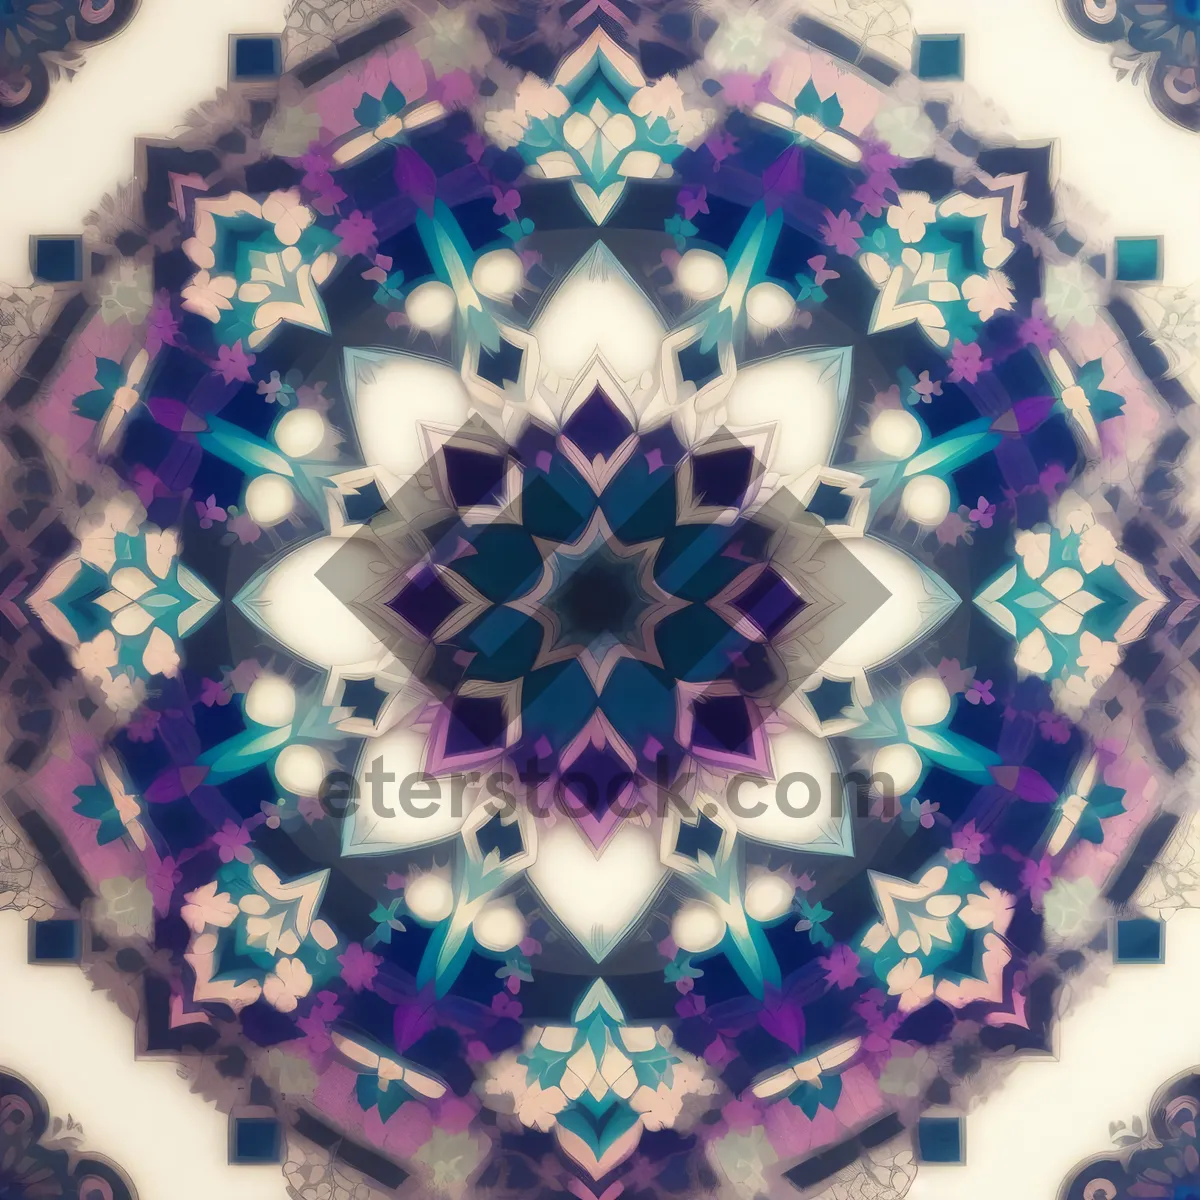 Picture of Colorful Graphic Mosaic Design with Kaleidoscope Patterns